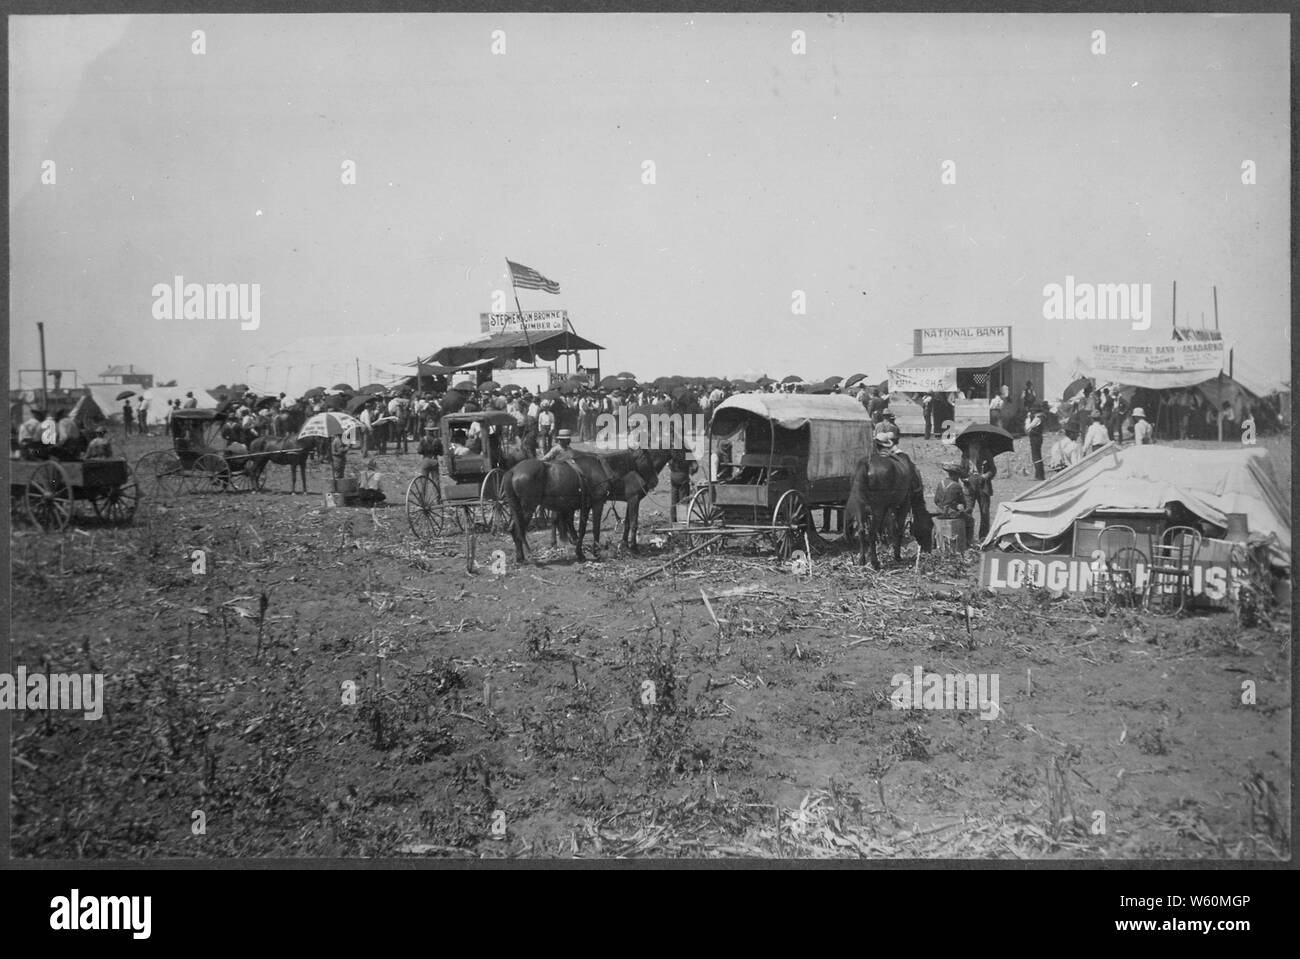 Anadarko Townsite, August 8, 1901. Auction in progress in lumber company booth. Temporary bank buildings and the beginnings of a lodging house nearby Stock Photo